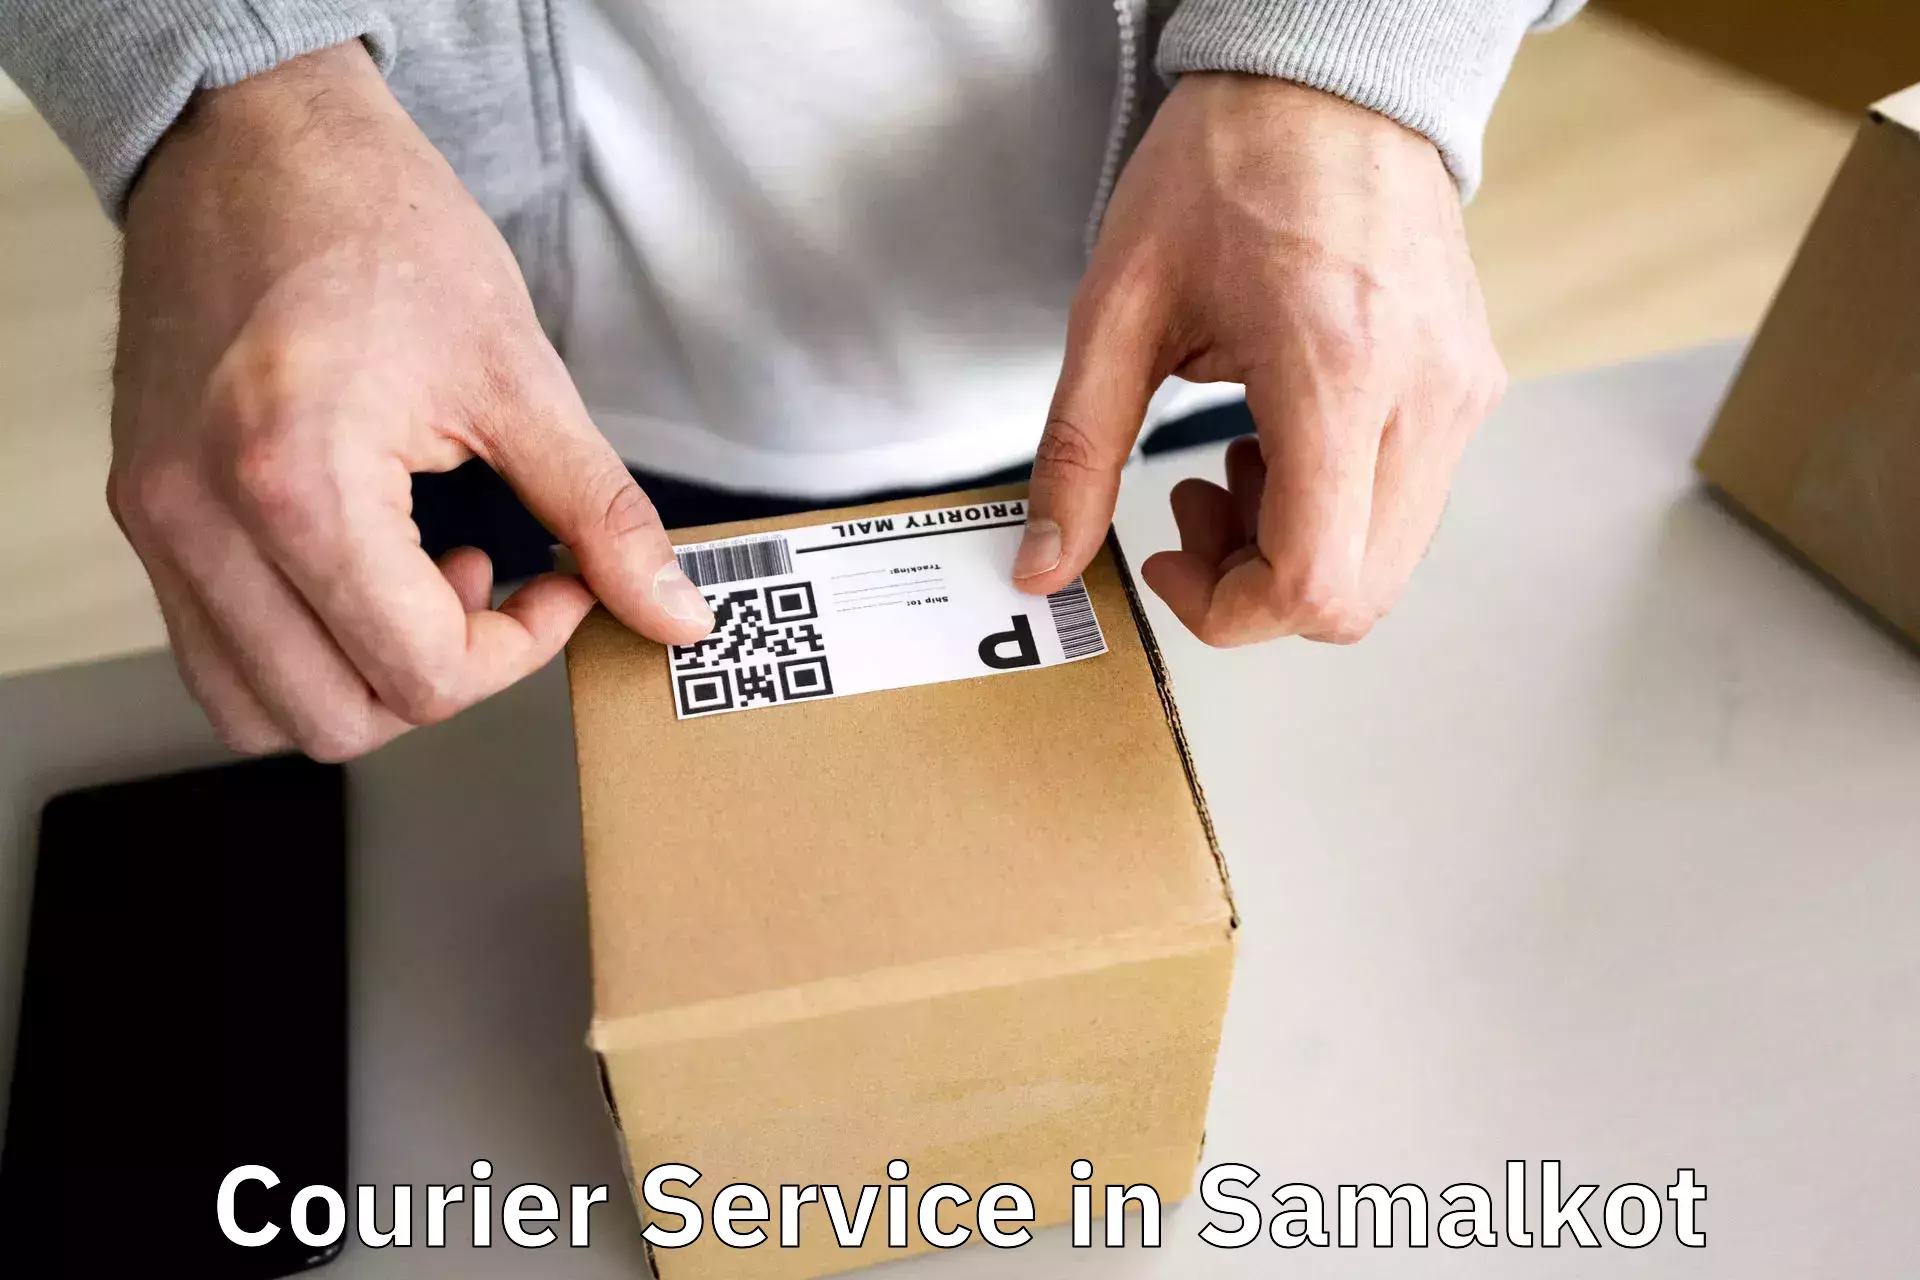 Air courier services in Samalkot